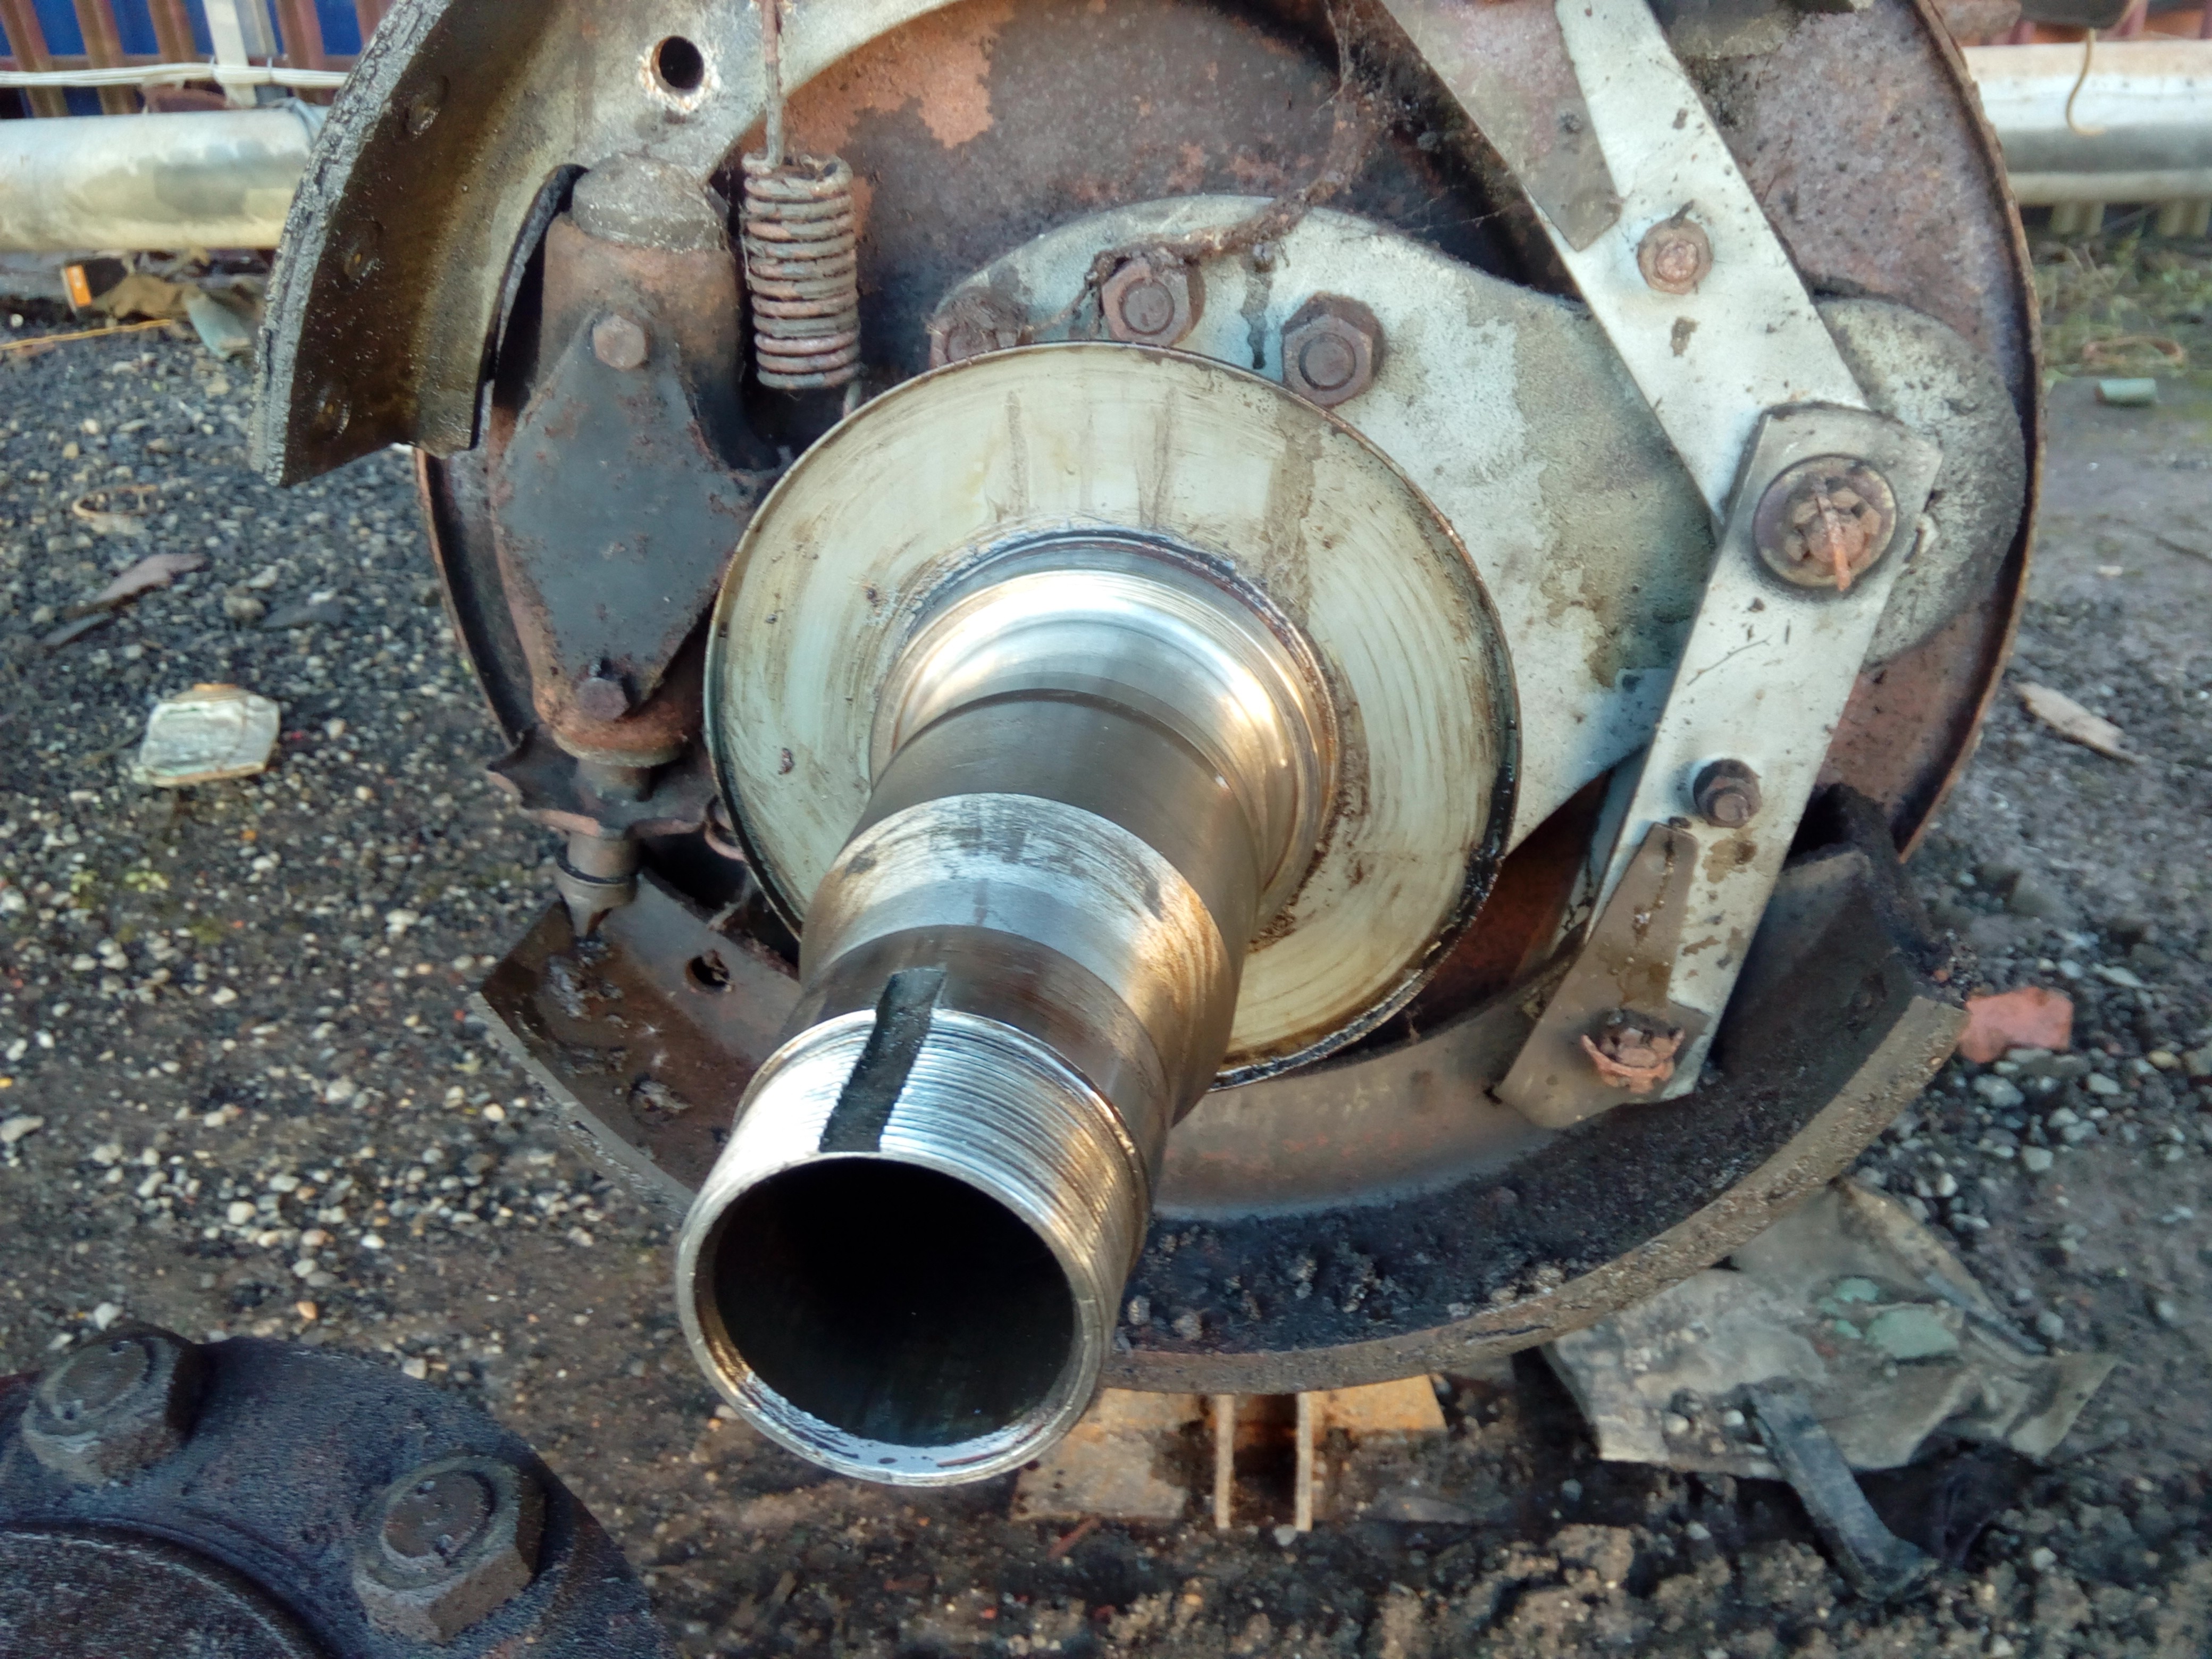 Close-up photograph of the axle's bearing surface, where the hub
has been freshly removed from, permitting acess to the brake
mechanism